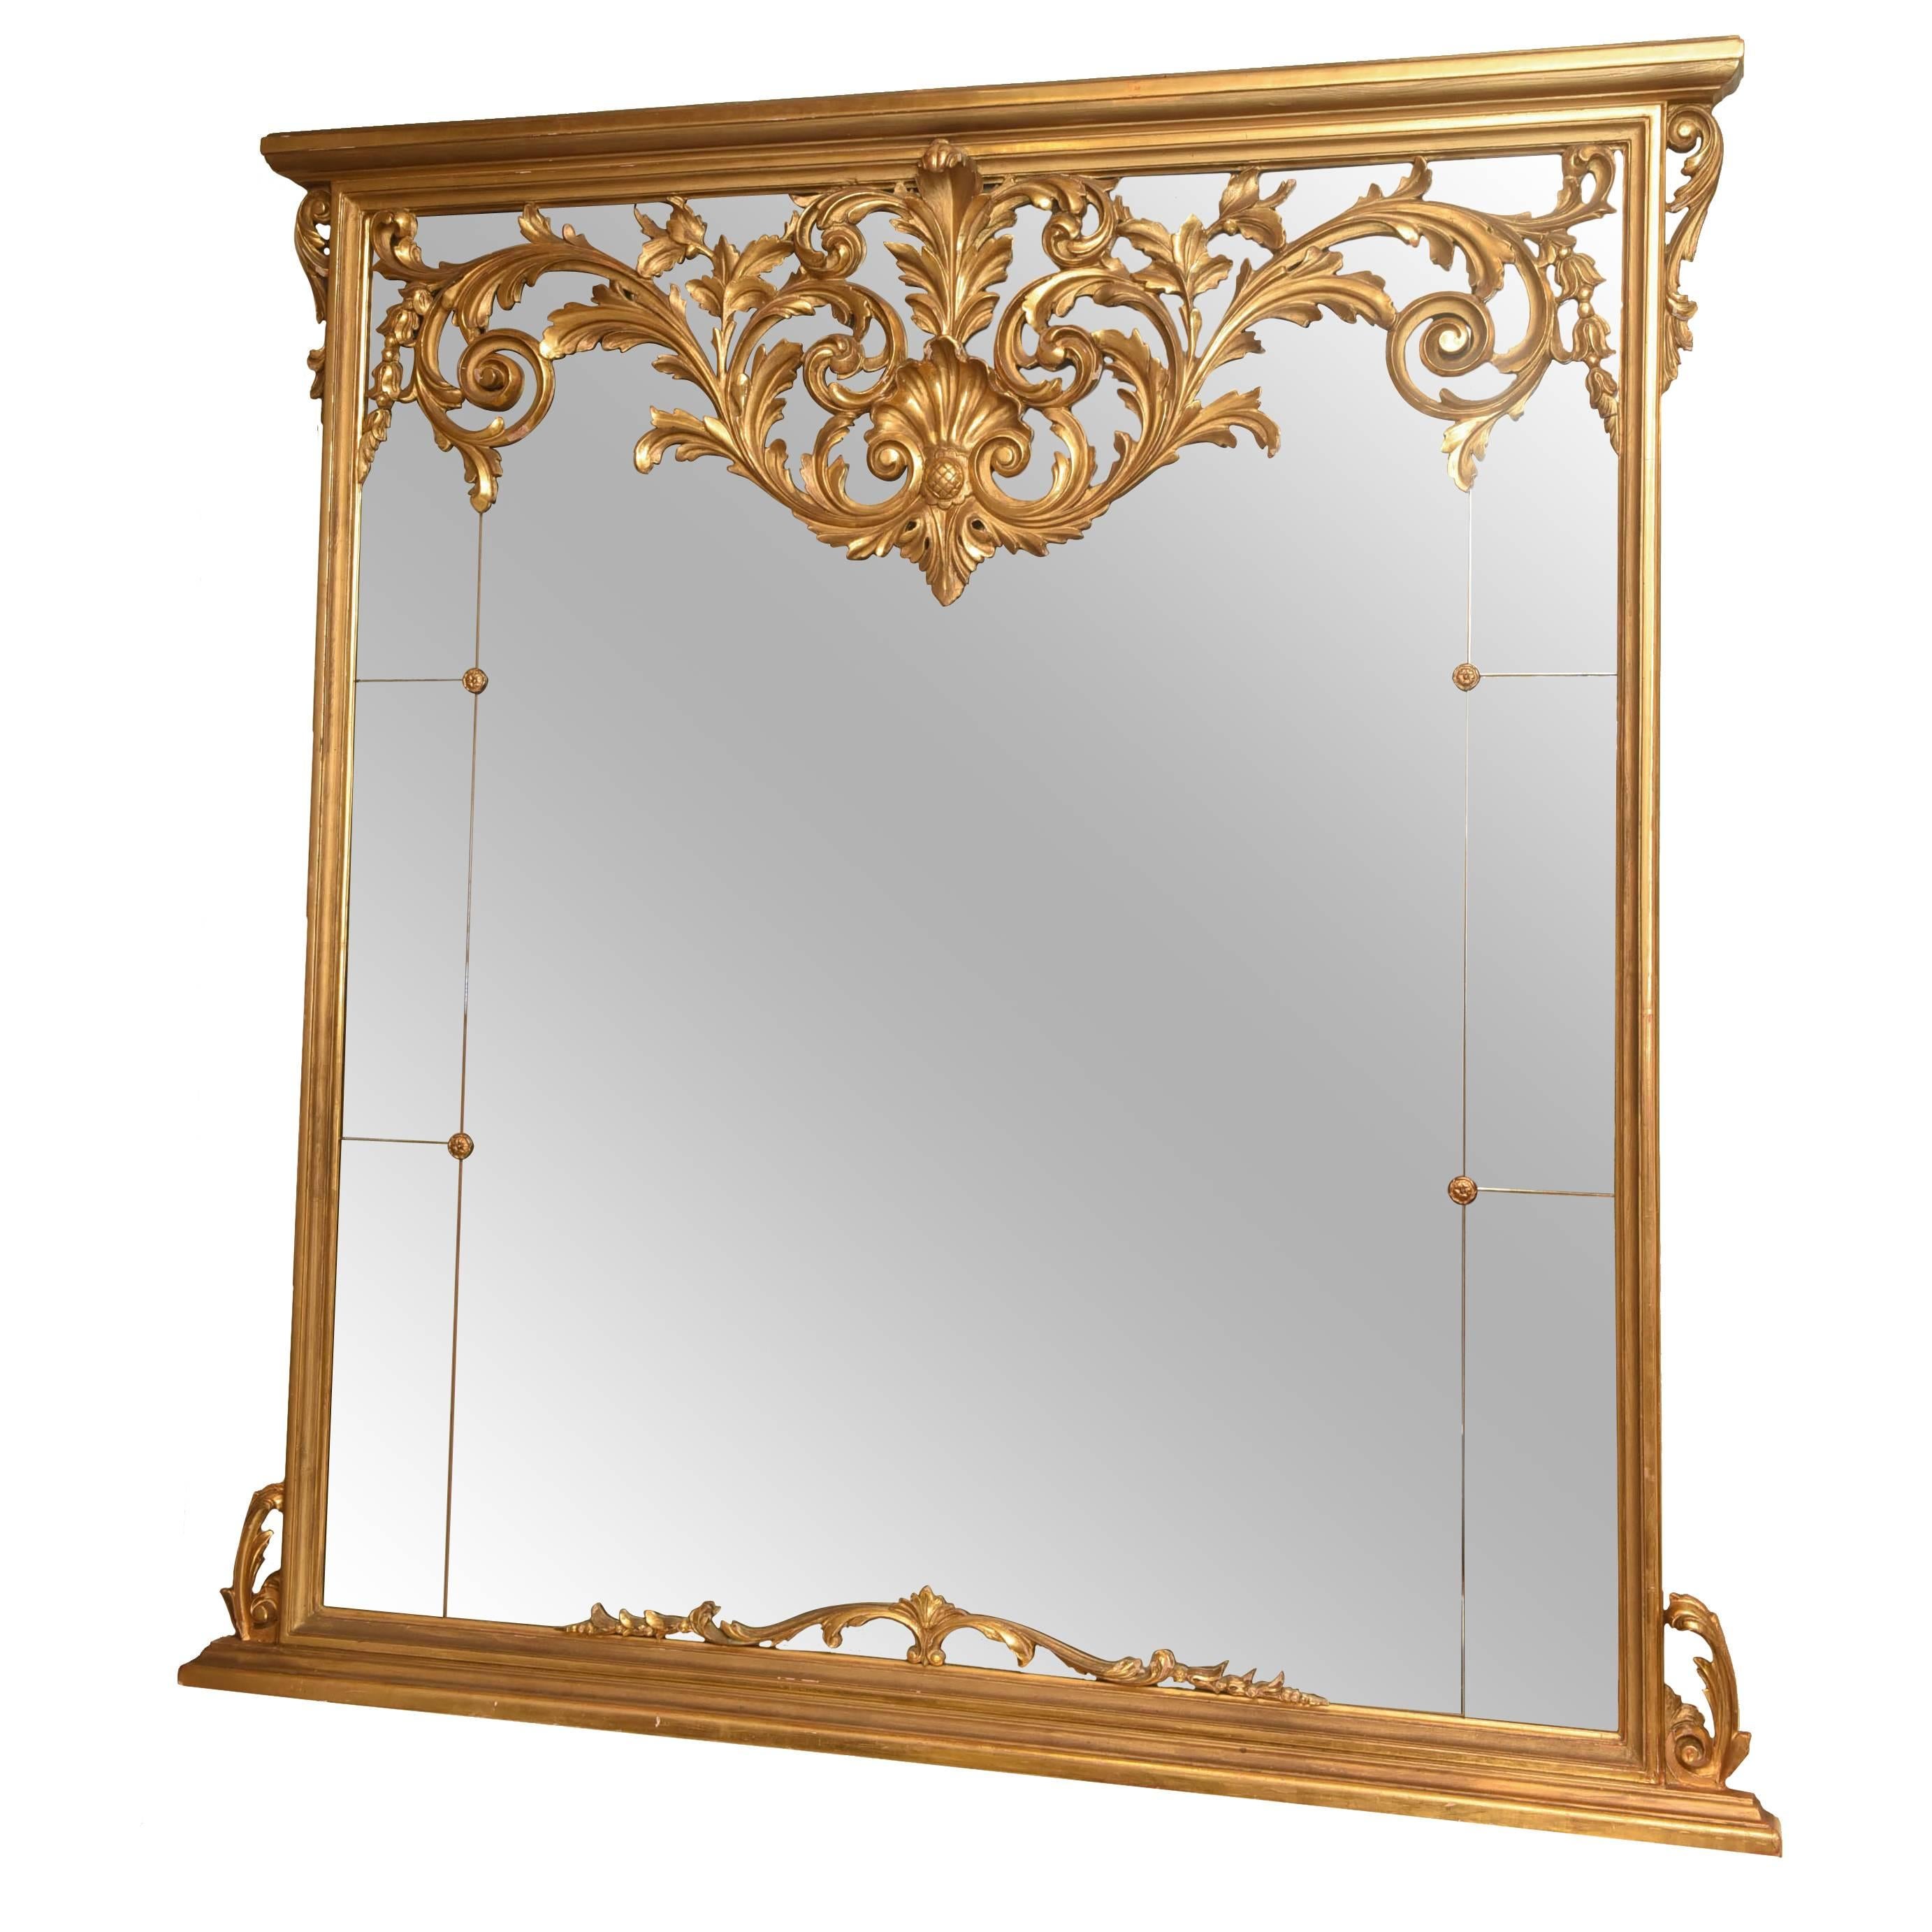 Large Sized, Victorian Giltwood Overmantle Mirror, with Scrolling Pediment